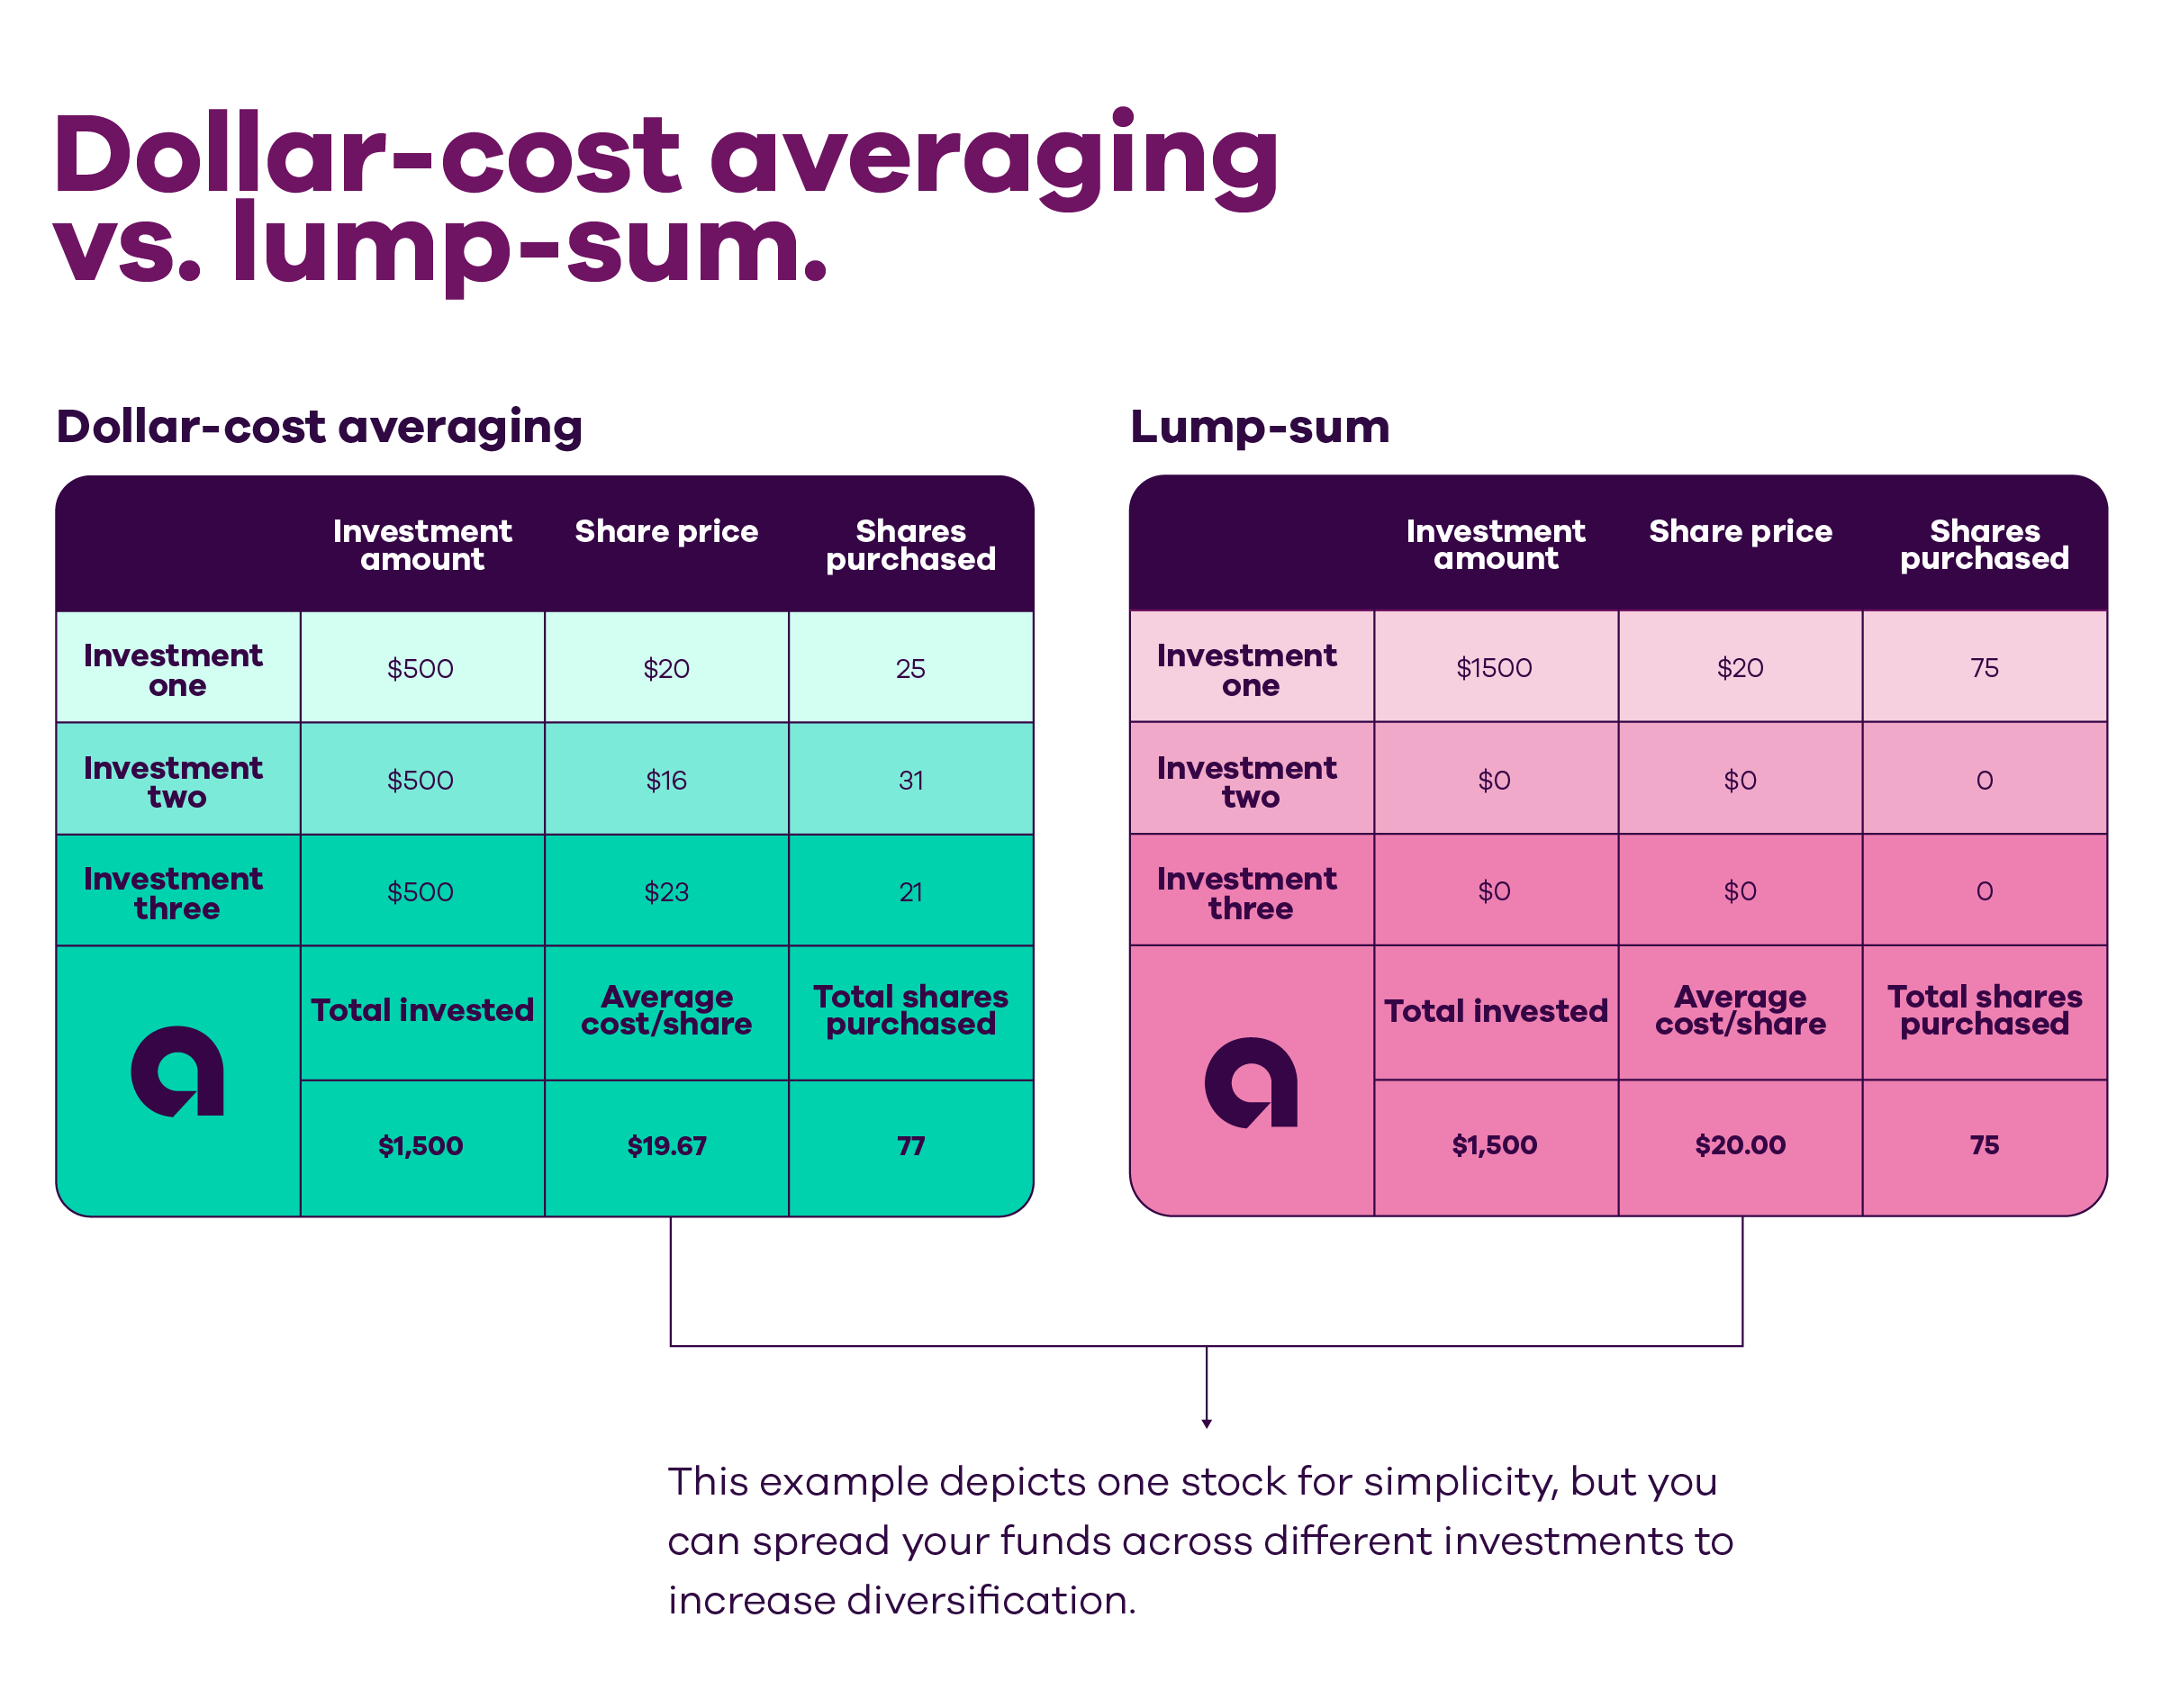 Two tables compare dollar-cost averaging vs. lump-sum. With dollar-cost averaging, $500 is invested each time. With investment one, the investor buys 25 shares at $20 each. With investment two, the investor buys 31 shares at $16 each, and with the third investment, the investor buys 21 shares at $23 each. The total comes out to 77 total shares with an average cost per share of $19.67. With lump-sum, the investor invests all $1,500 at once, purchasing 75 shares at $20 each. This example depicts one stock for simplicity, but you can spread your funds across different investments to increase diversification.